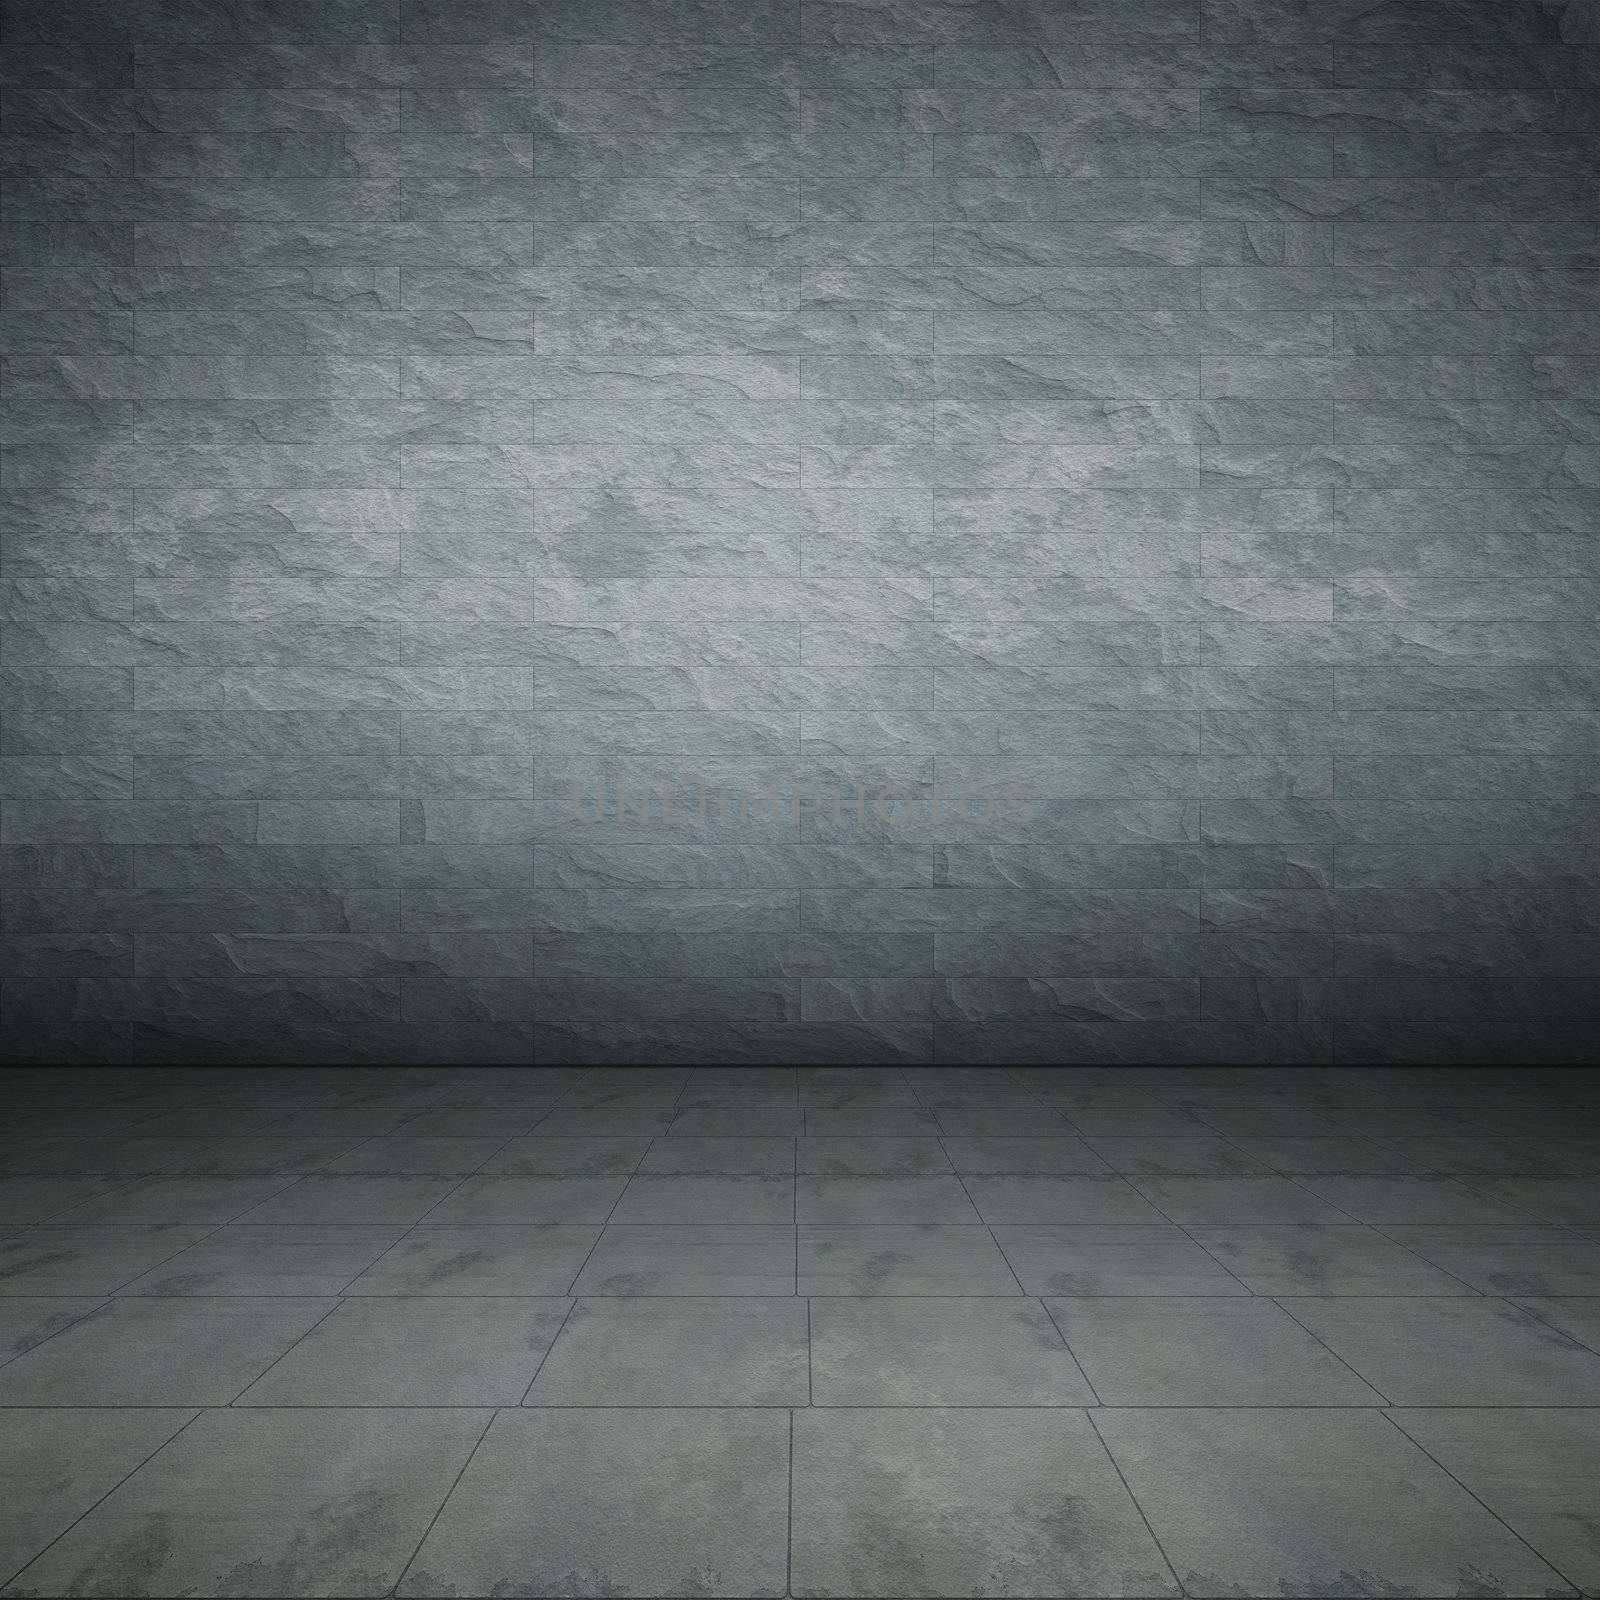 An image of a nice concrete floor background